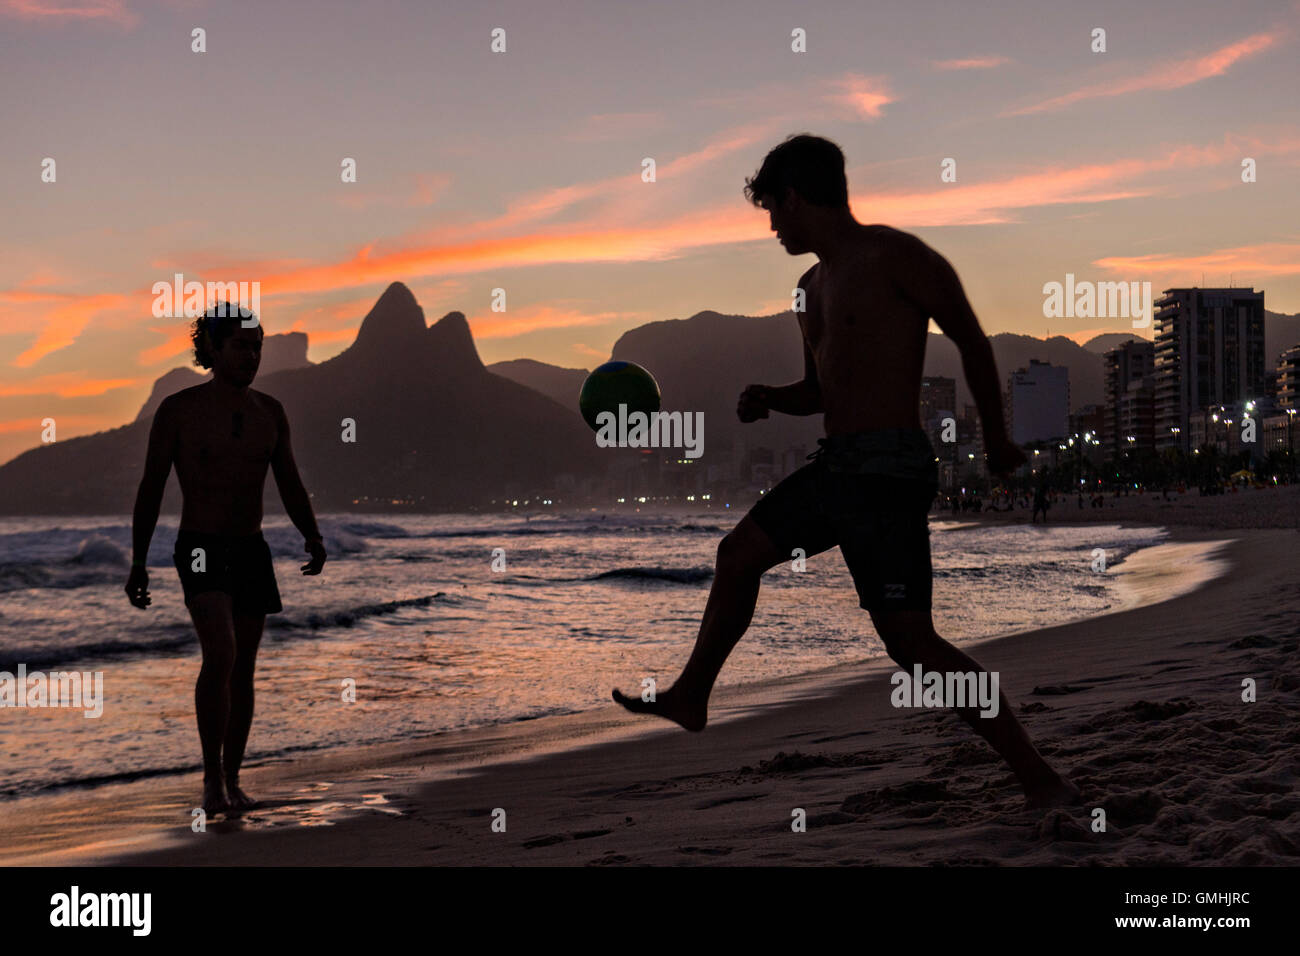 Young men play football on Ipanema beach silhouetted by sunset with the Two Brother mountains in the distance in Rio de Janeiro, Brazil. Stock Photo